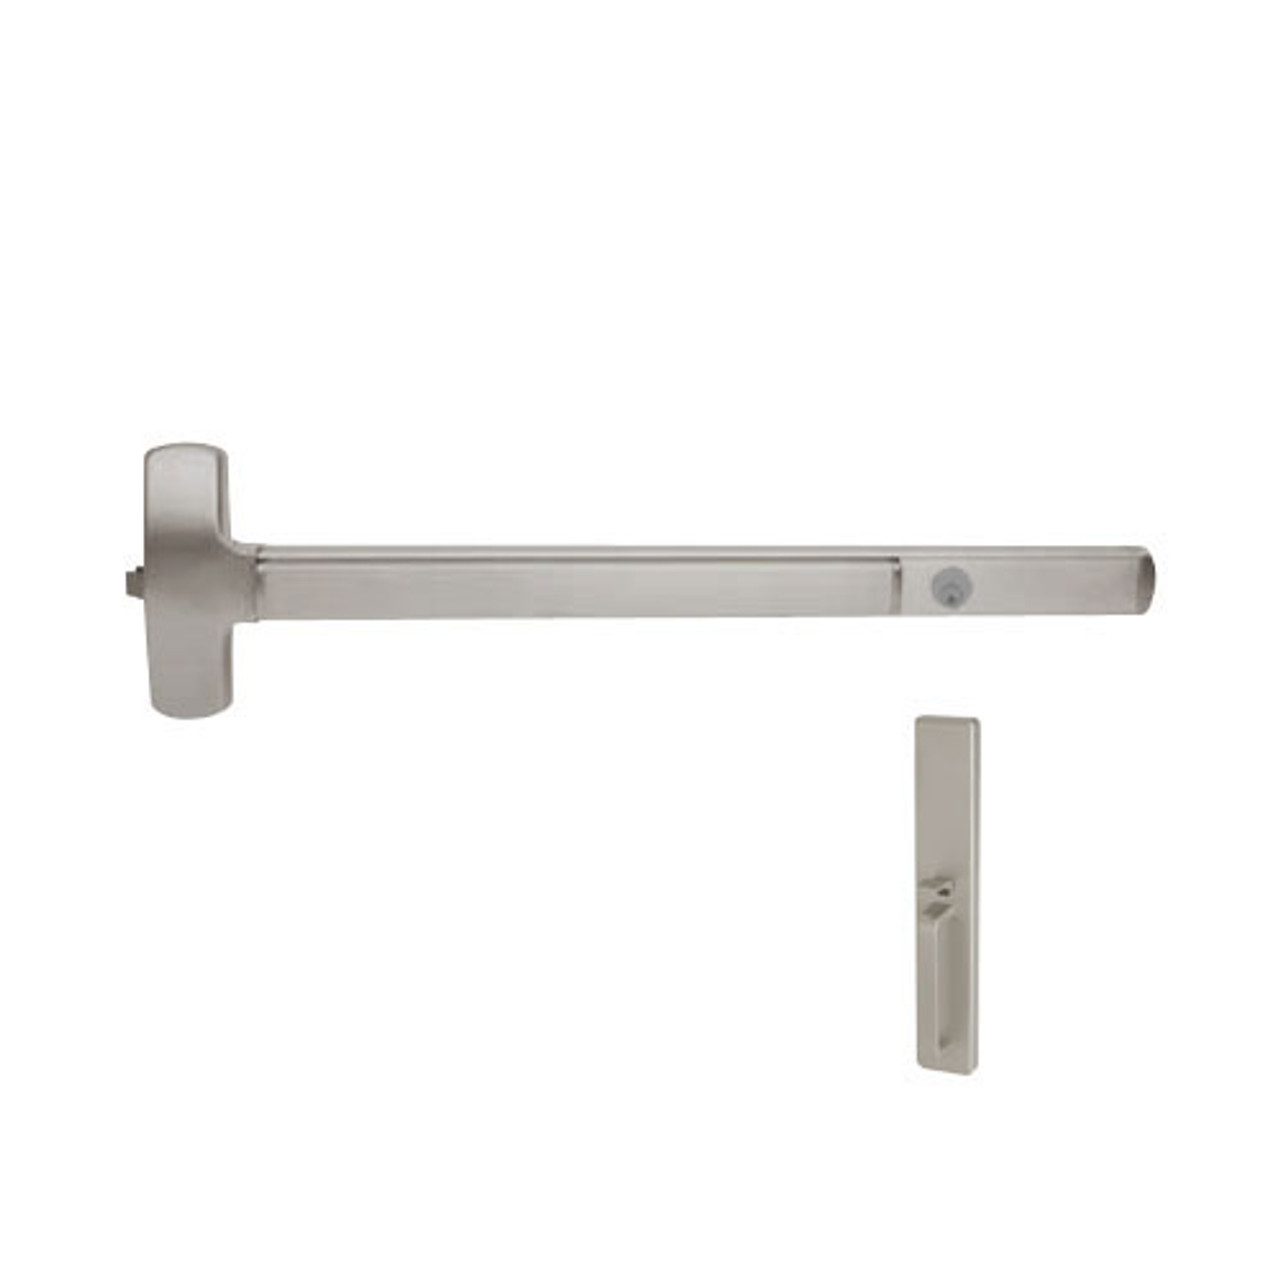 CD25-R-TP-BE-US32D-3 Falcon Exit Device in Satin Stainless Steel